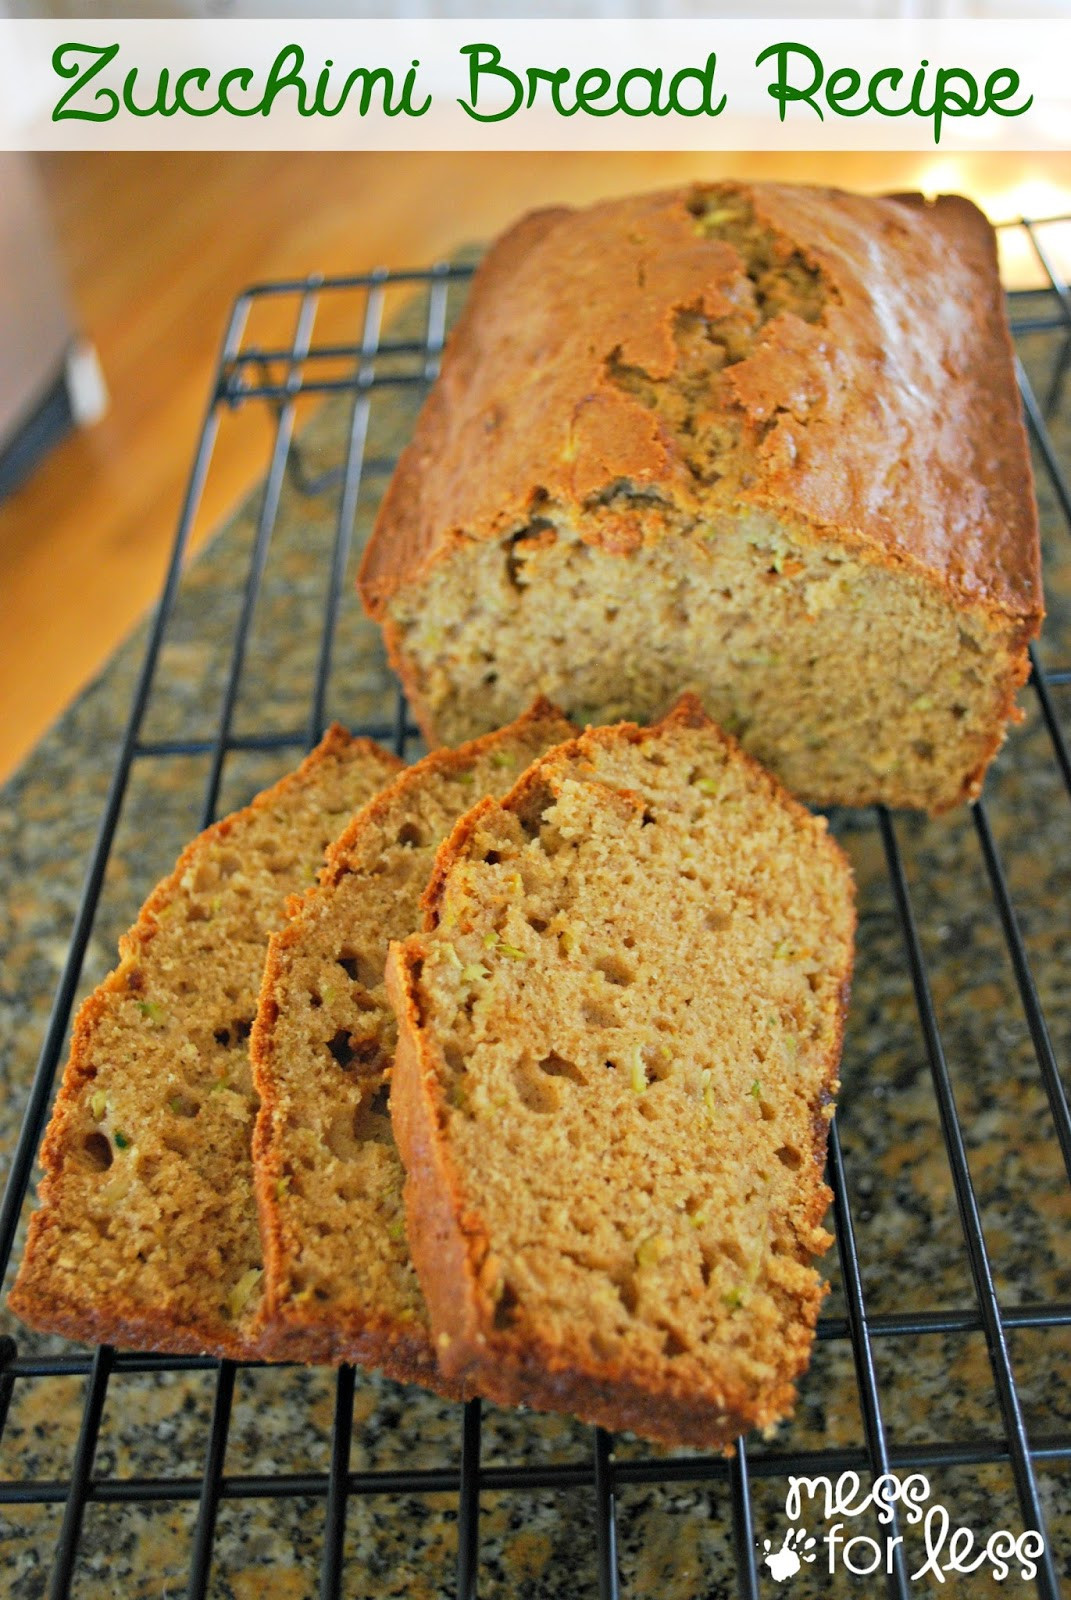 Zucchini Bread Recipe
 Zucchini Bread Recipe Mess for Less